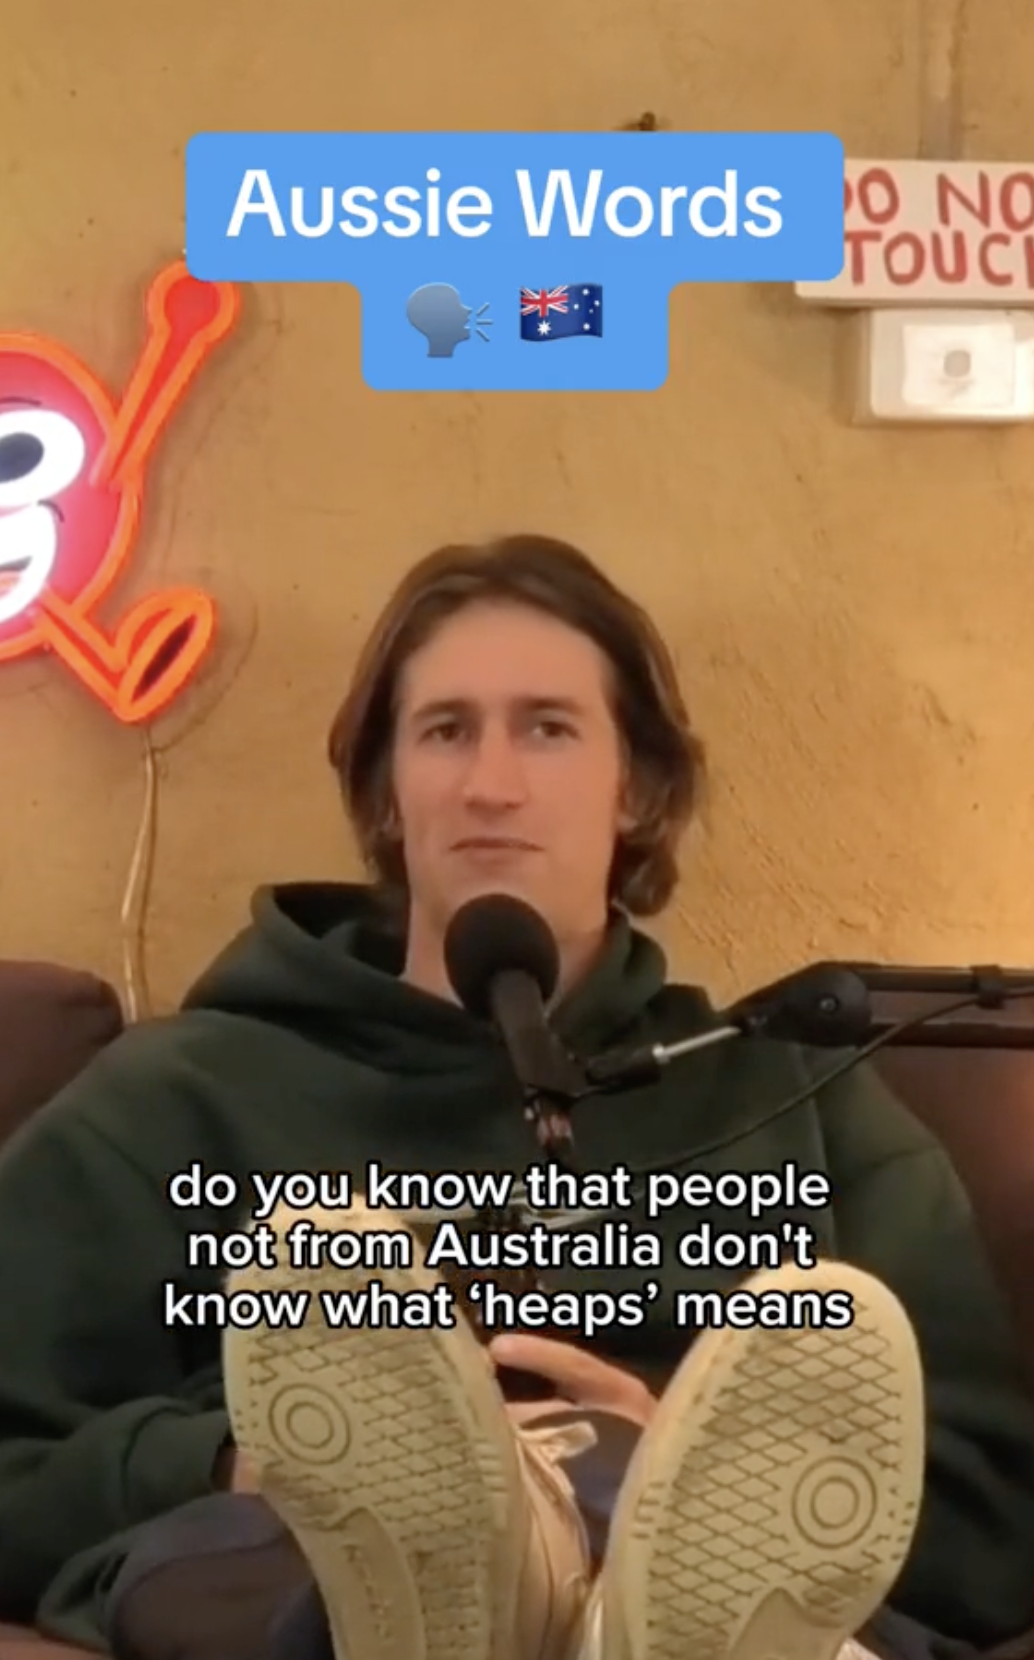 Person wearing a hoodie sits on a couch, text overlay discussing the Australian word &quot;heaps.&quot;